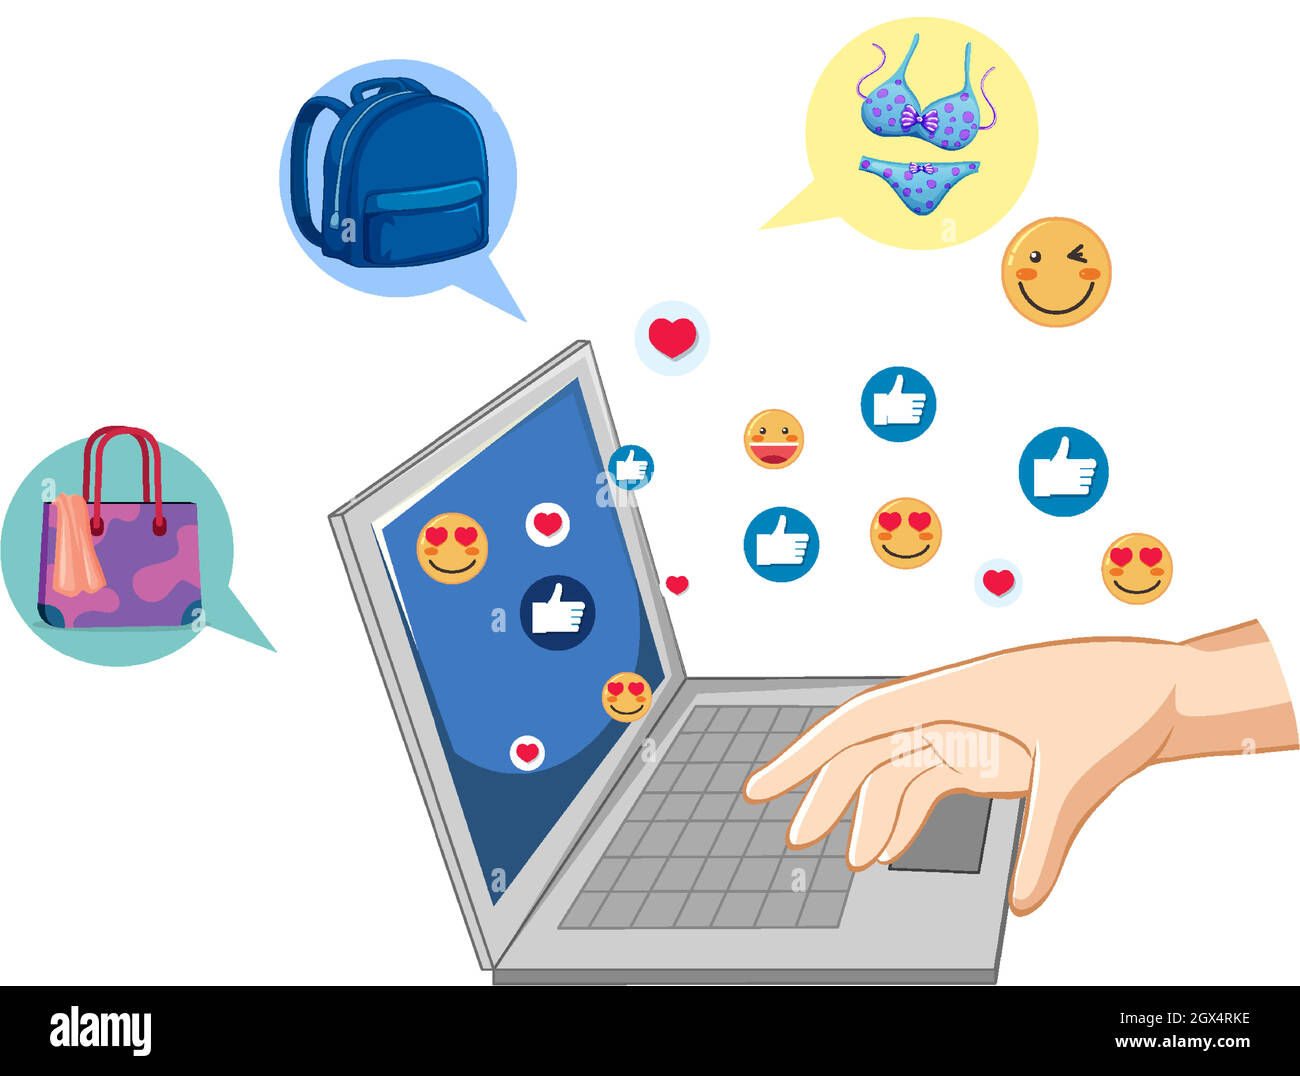 Hand using laptop with emoji icons on white background Stock Vector